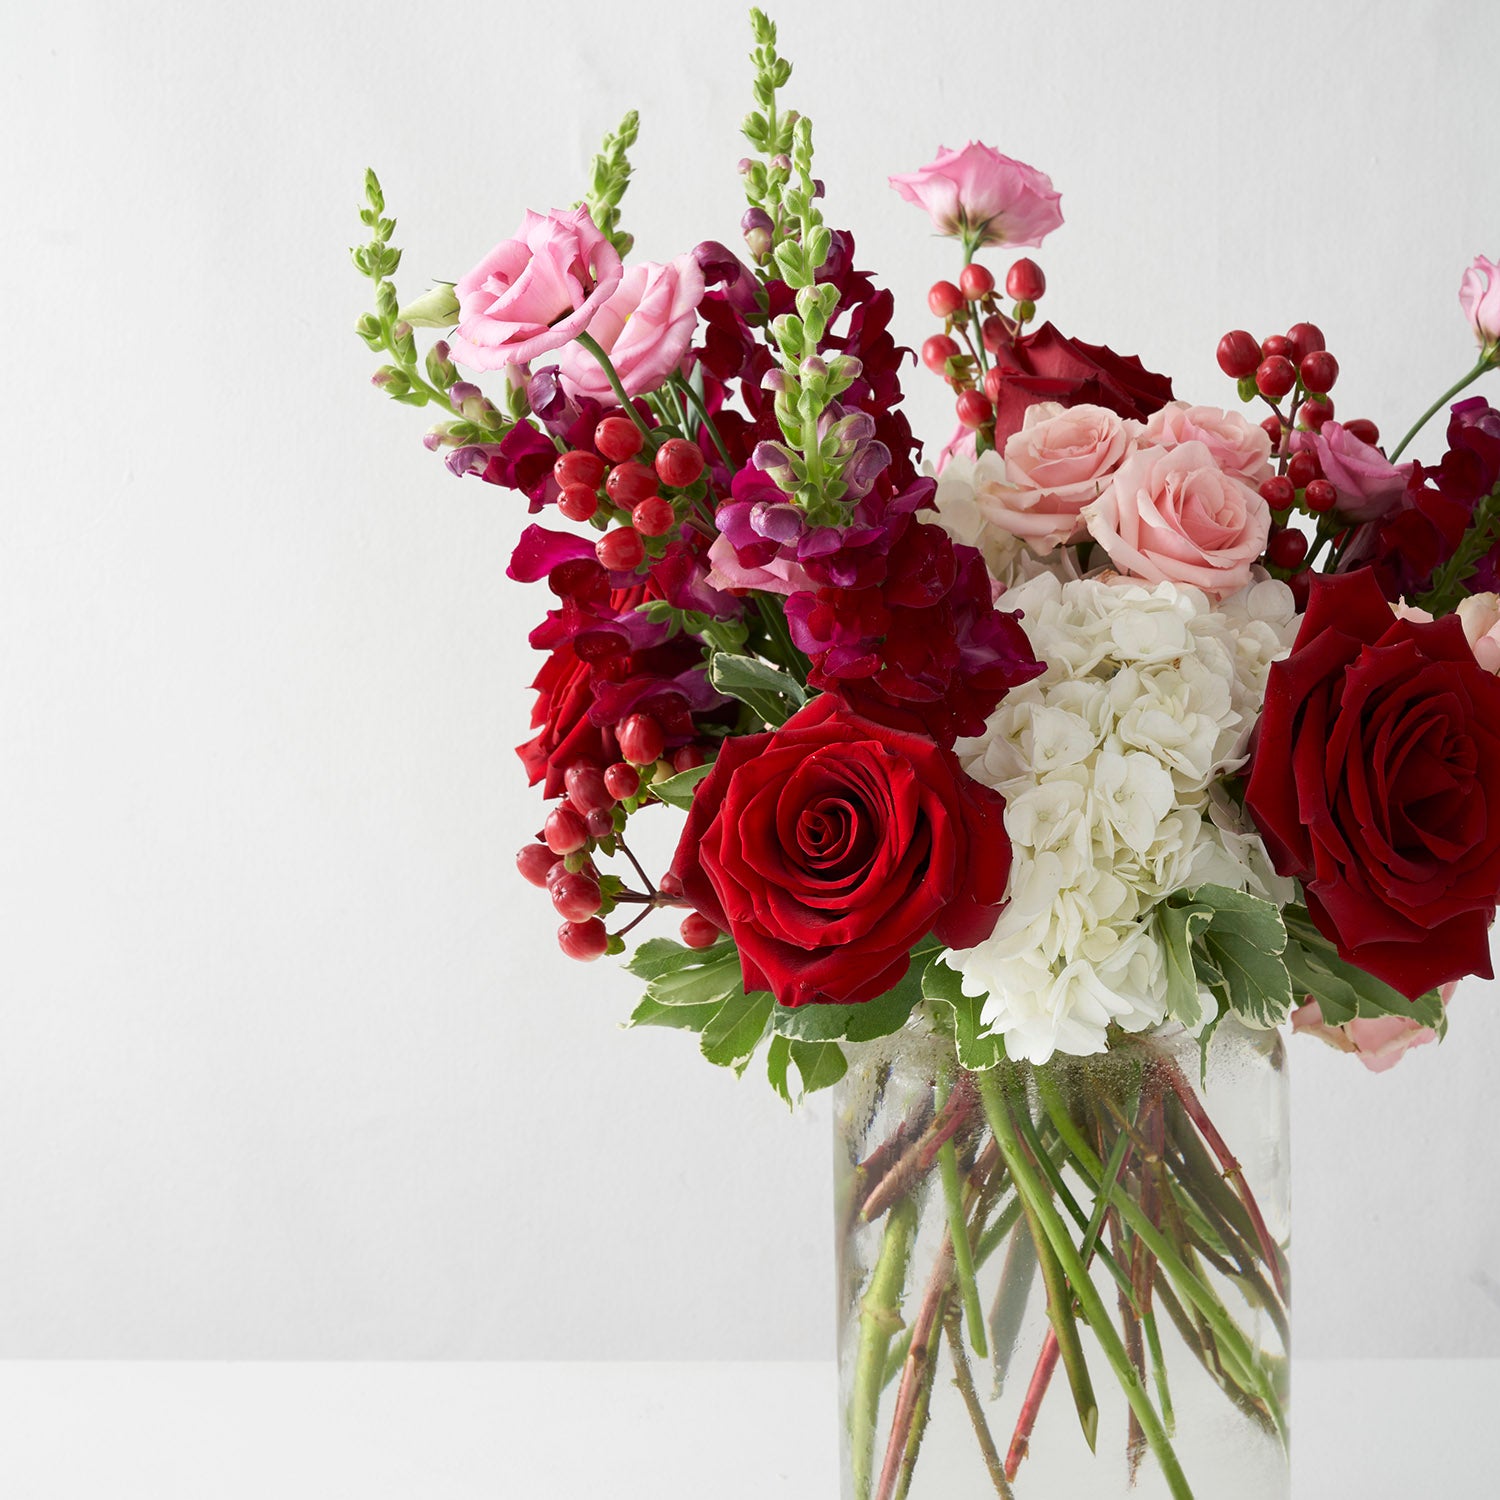 Red,pink and white arrangement, including hydrangea and roses, in glass vase on white background.